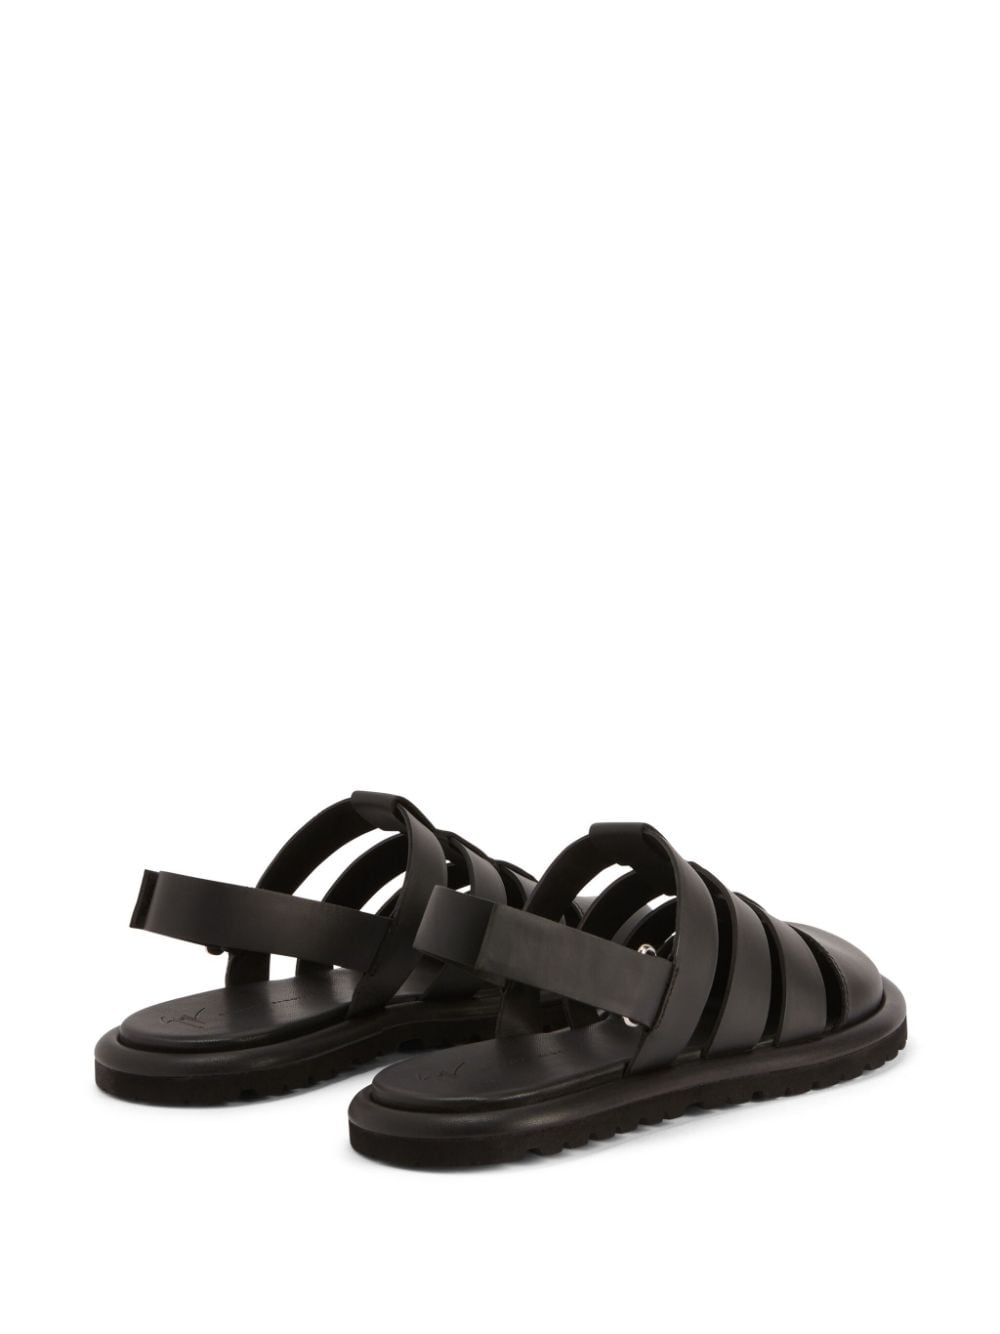 RUSERY LEATHER CAGE SANDALS